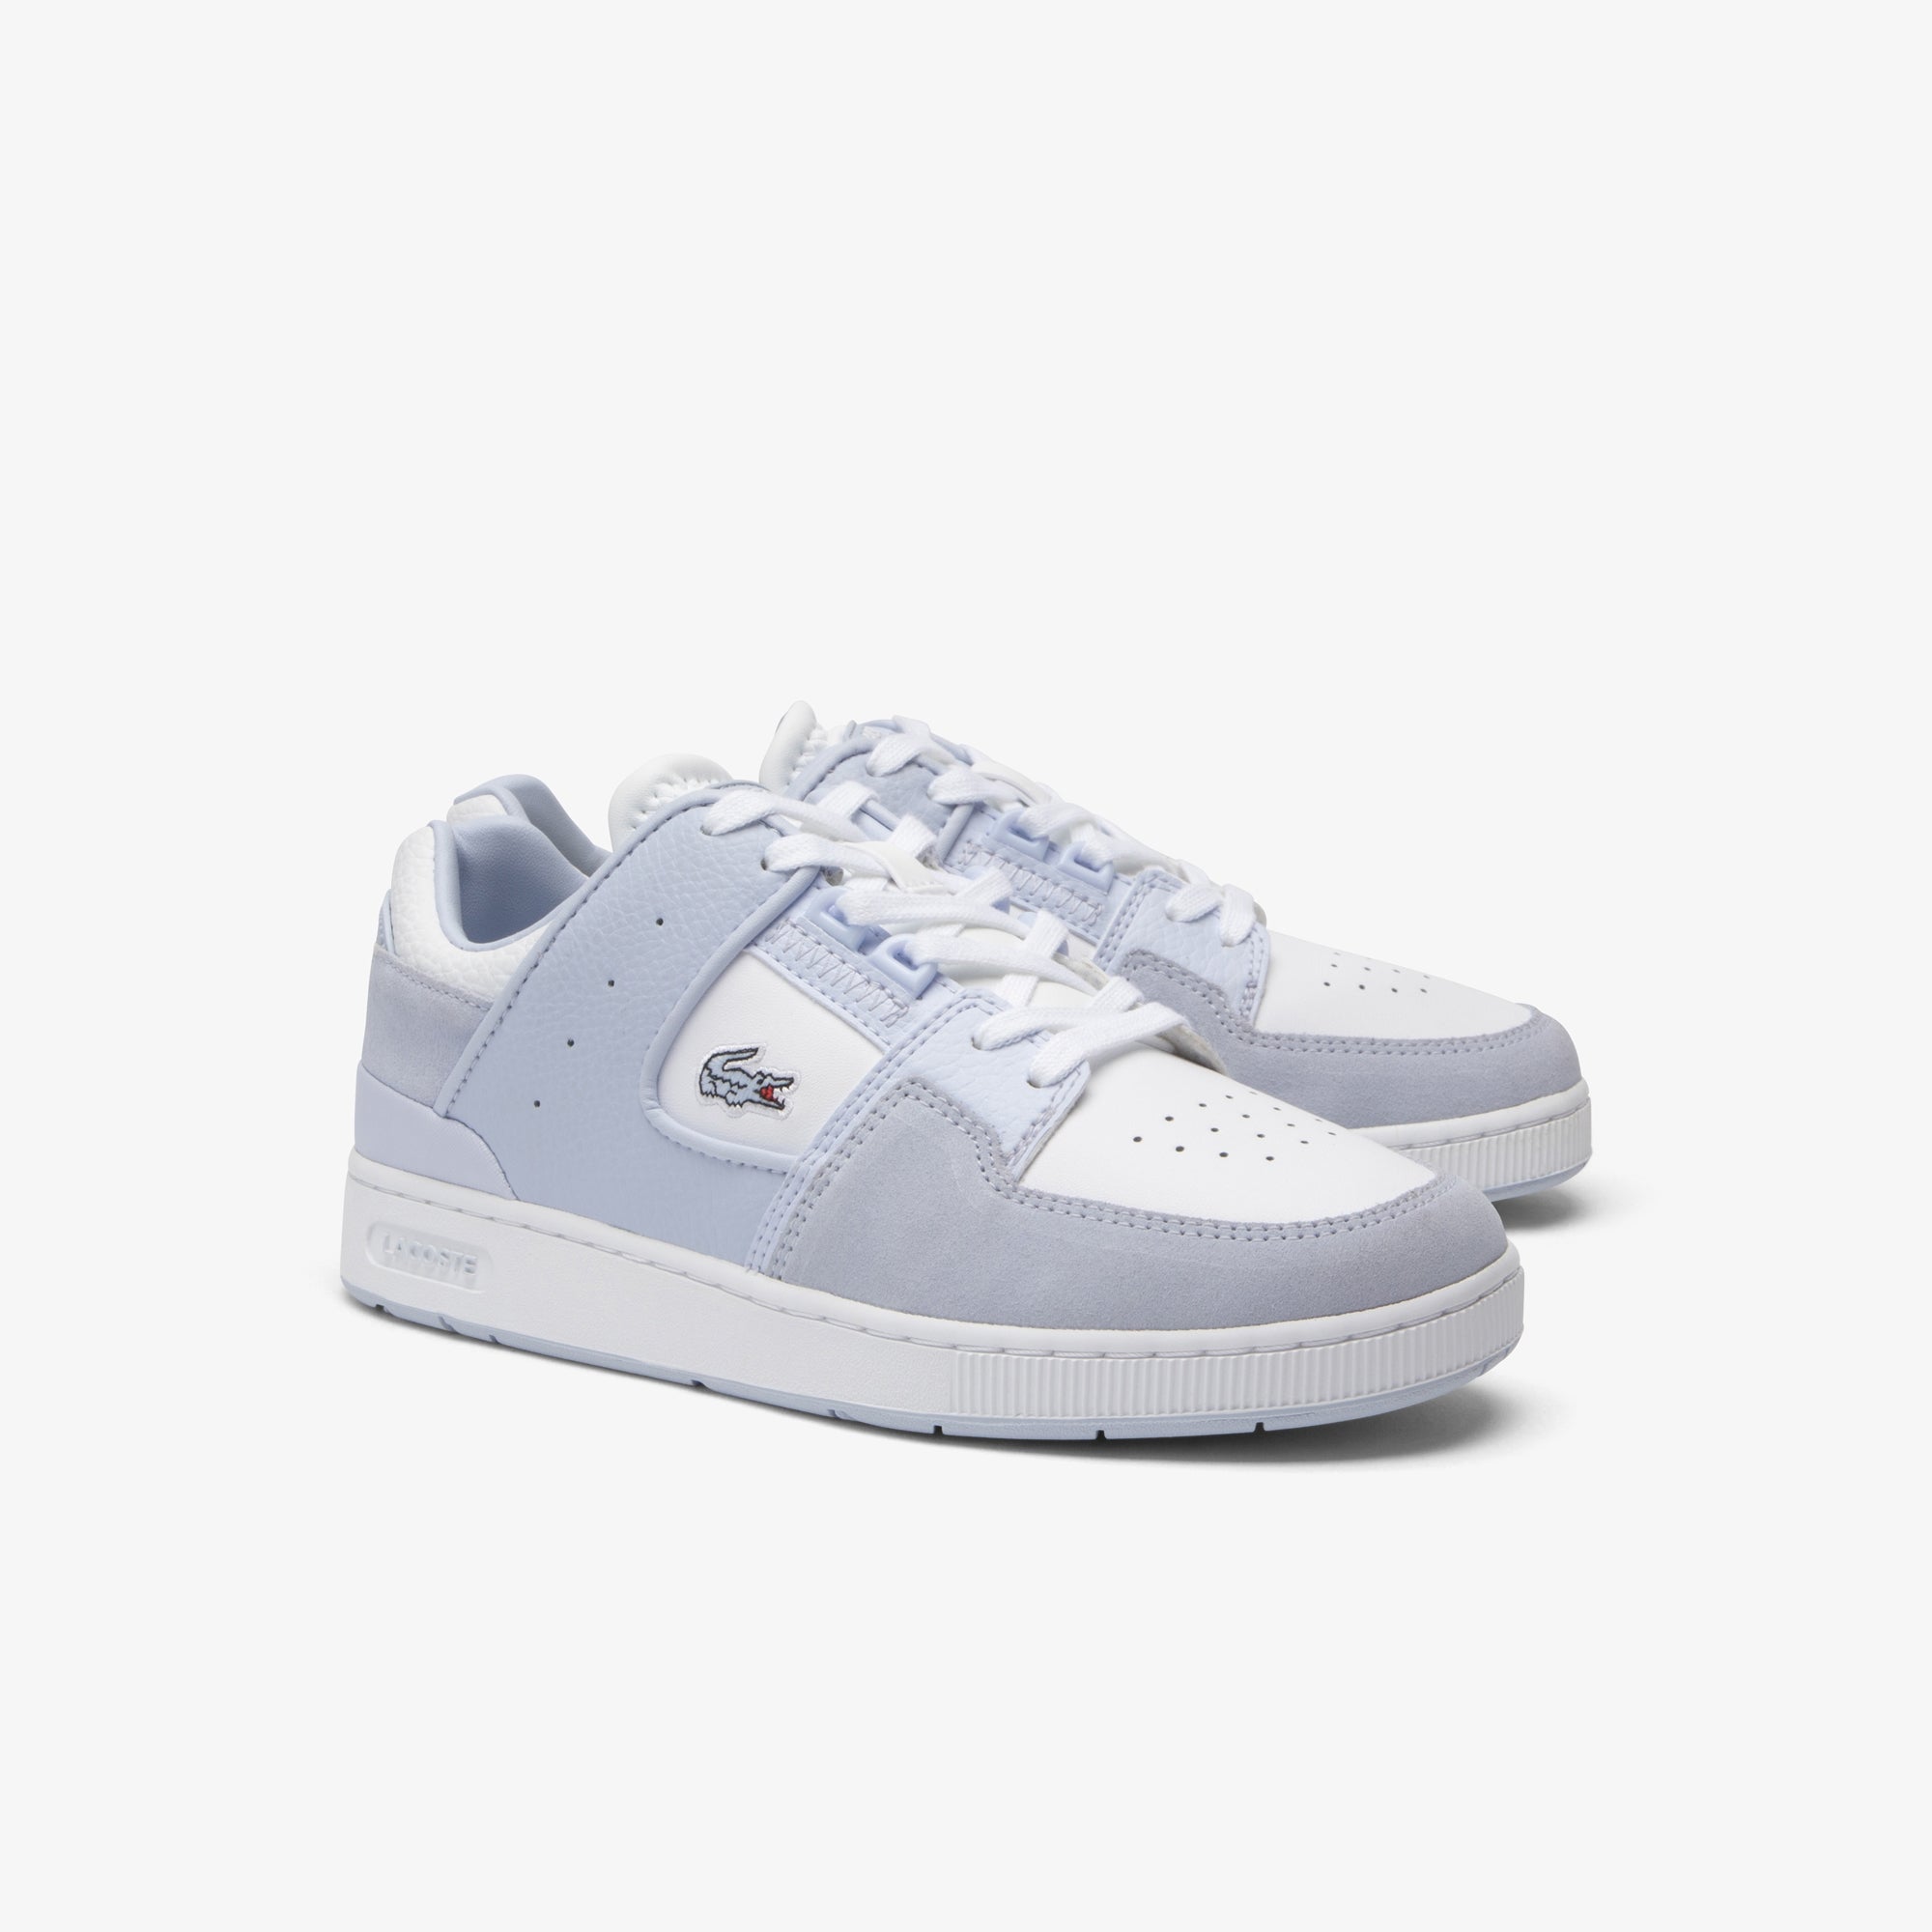 Lacoste - Court Cage 124 2 Sneaker - Light Blue/White